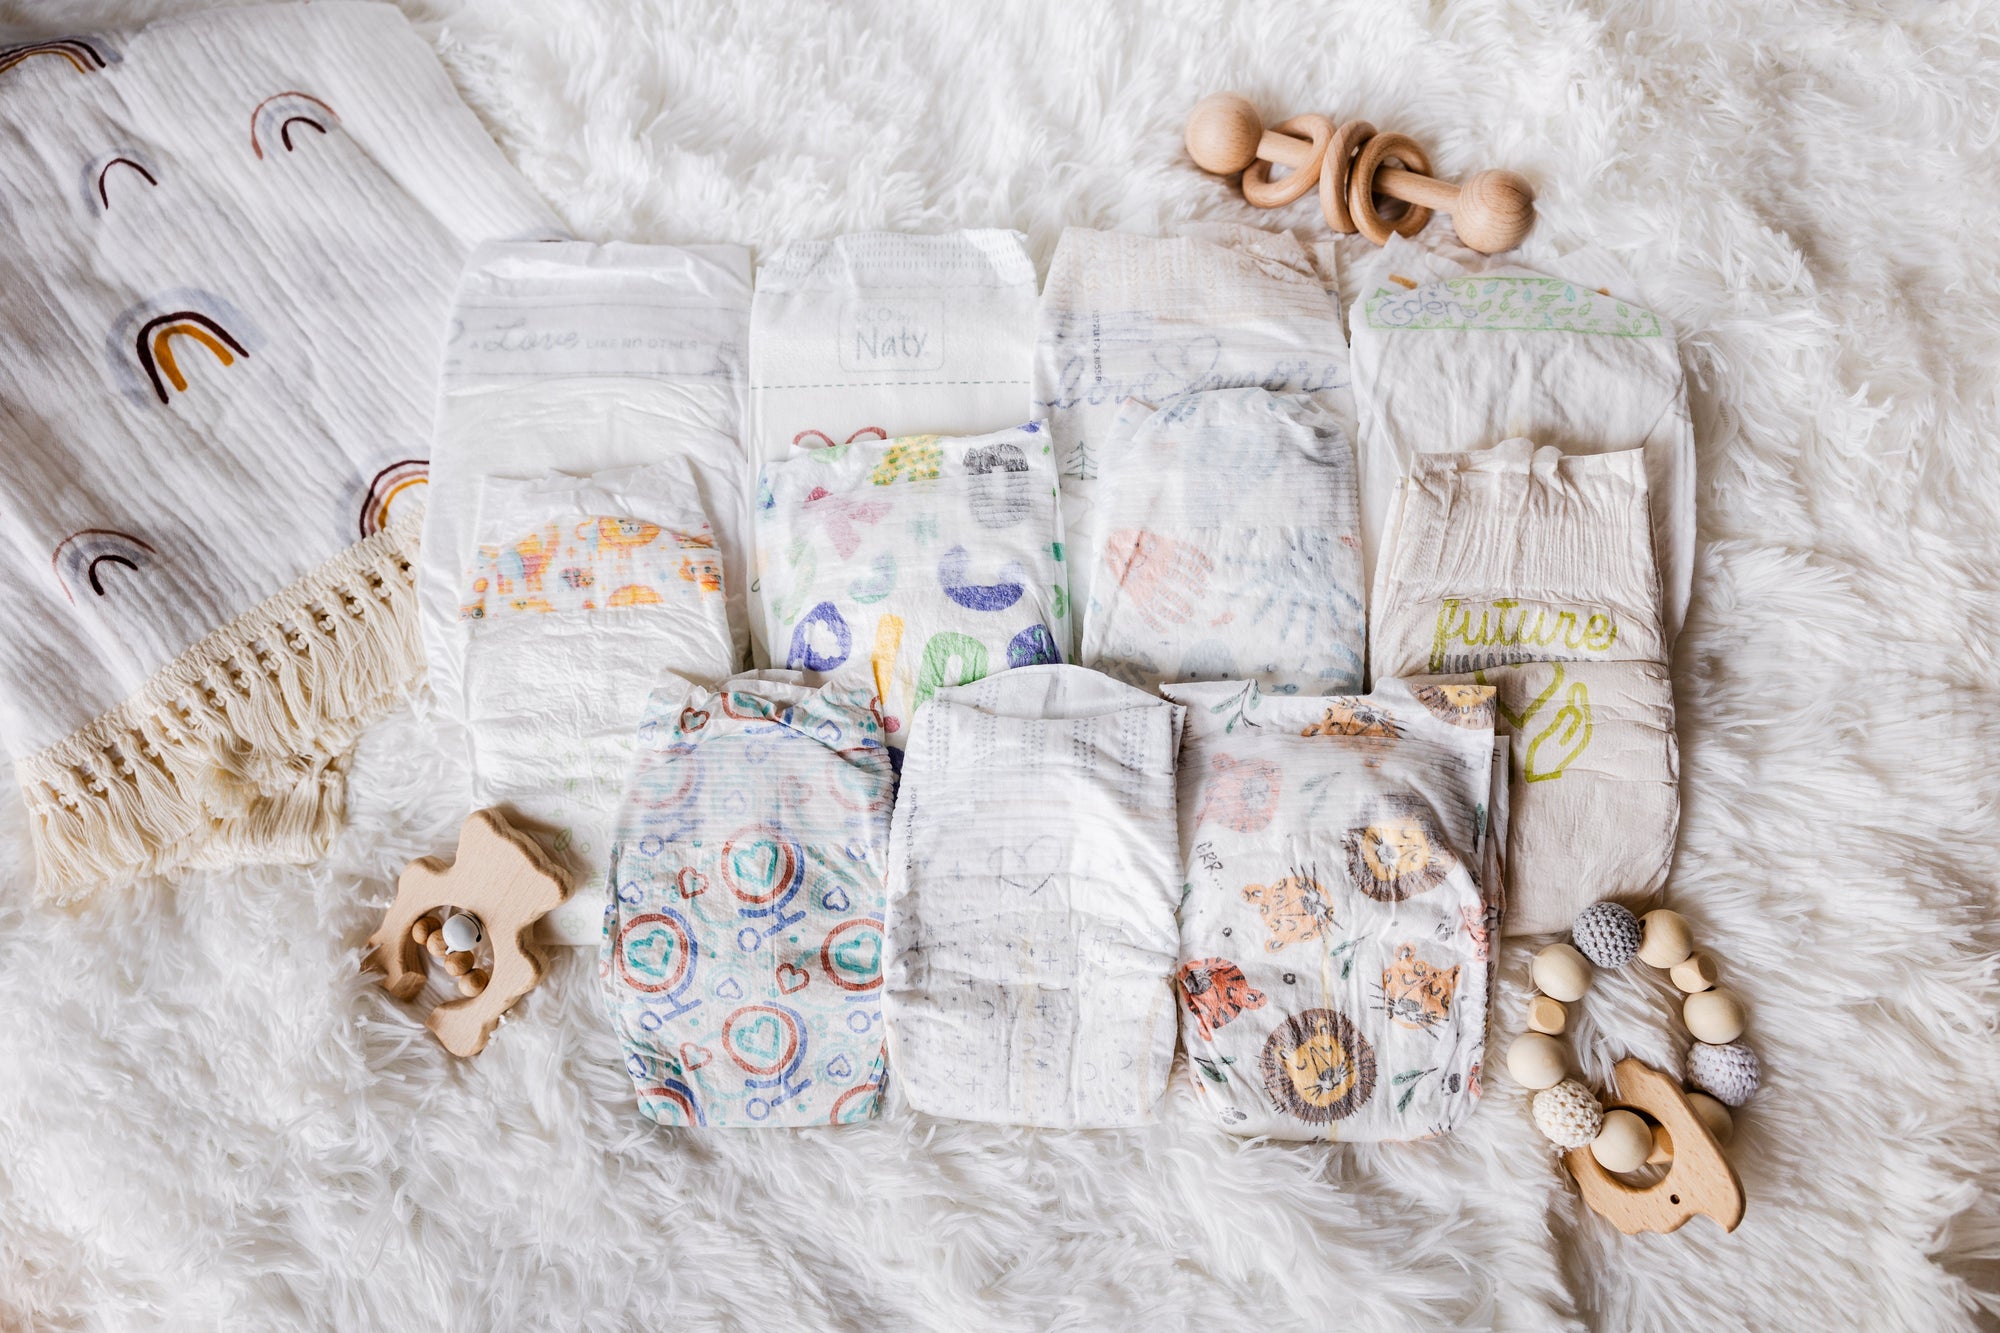 Natural Choice for New Babies Diaper Sampler Package: 11 Diaper Sample Packs of eco-friendly diapers in newborn and size 1 including Bambo Nature, Babyganics, ECO by Naty, Hello Bello, Pampers Pure Protection, ABBY&FINN, Earth & Eden and Seventh Generation